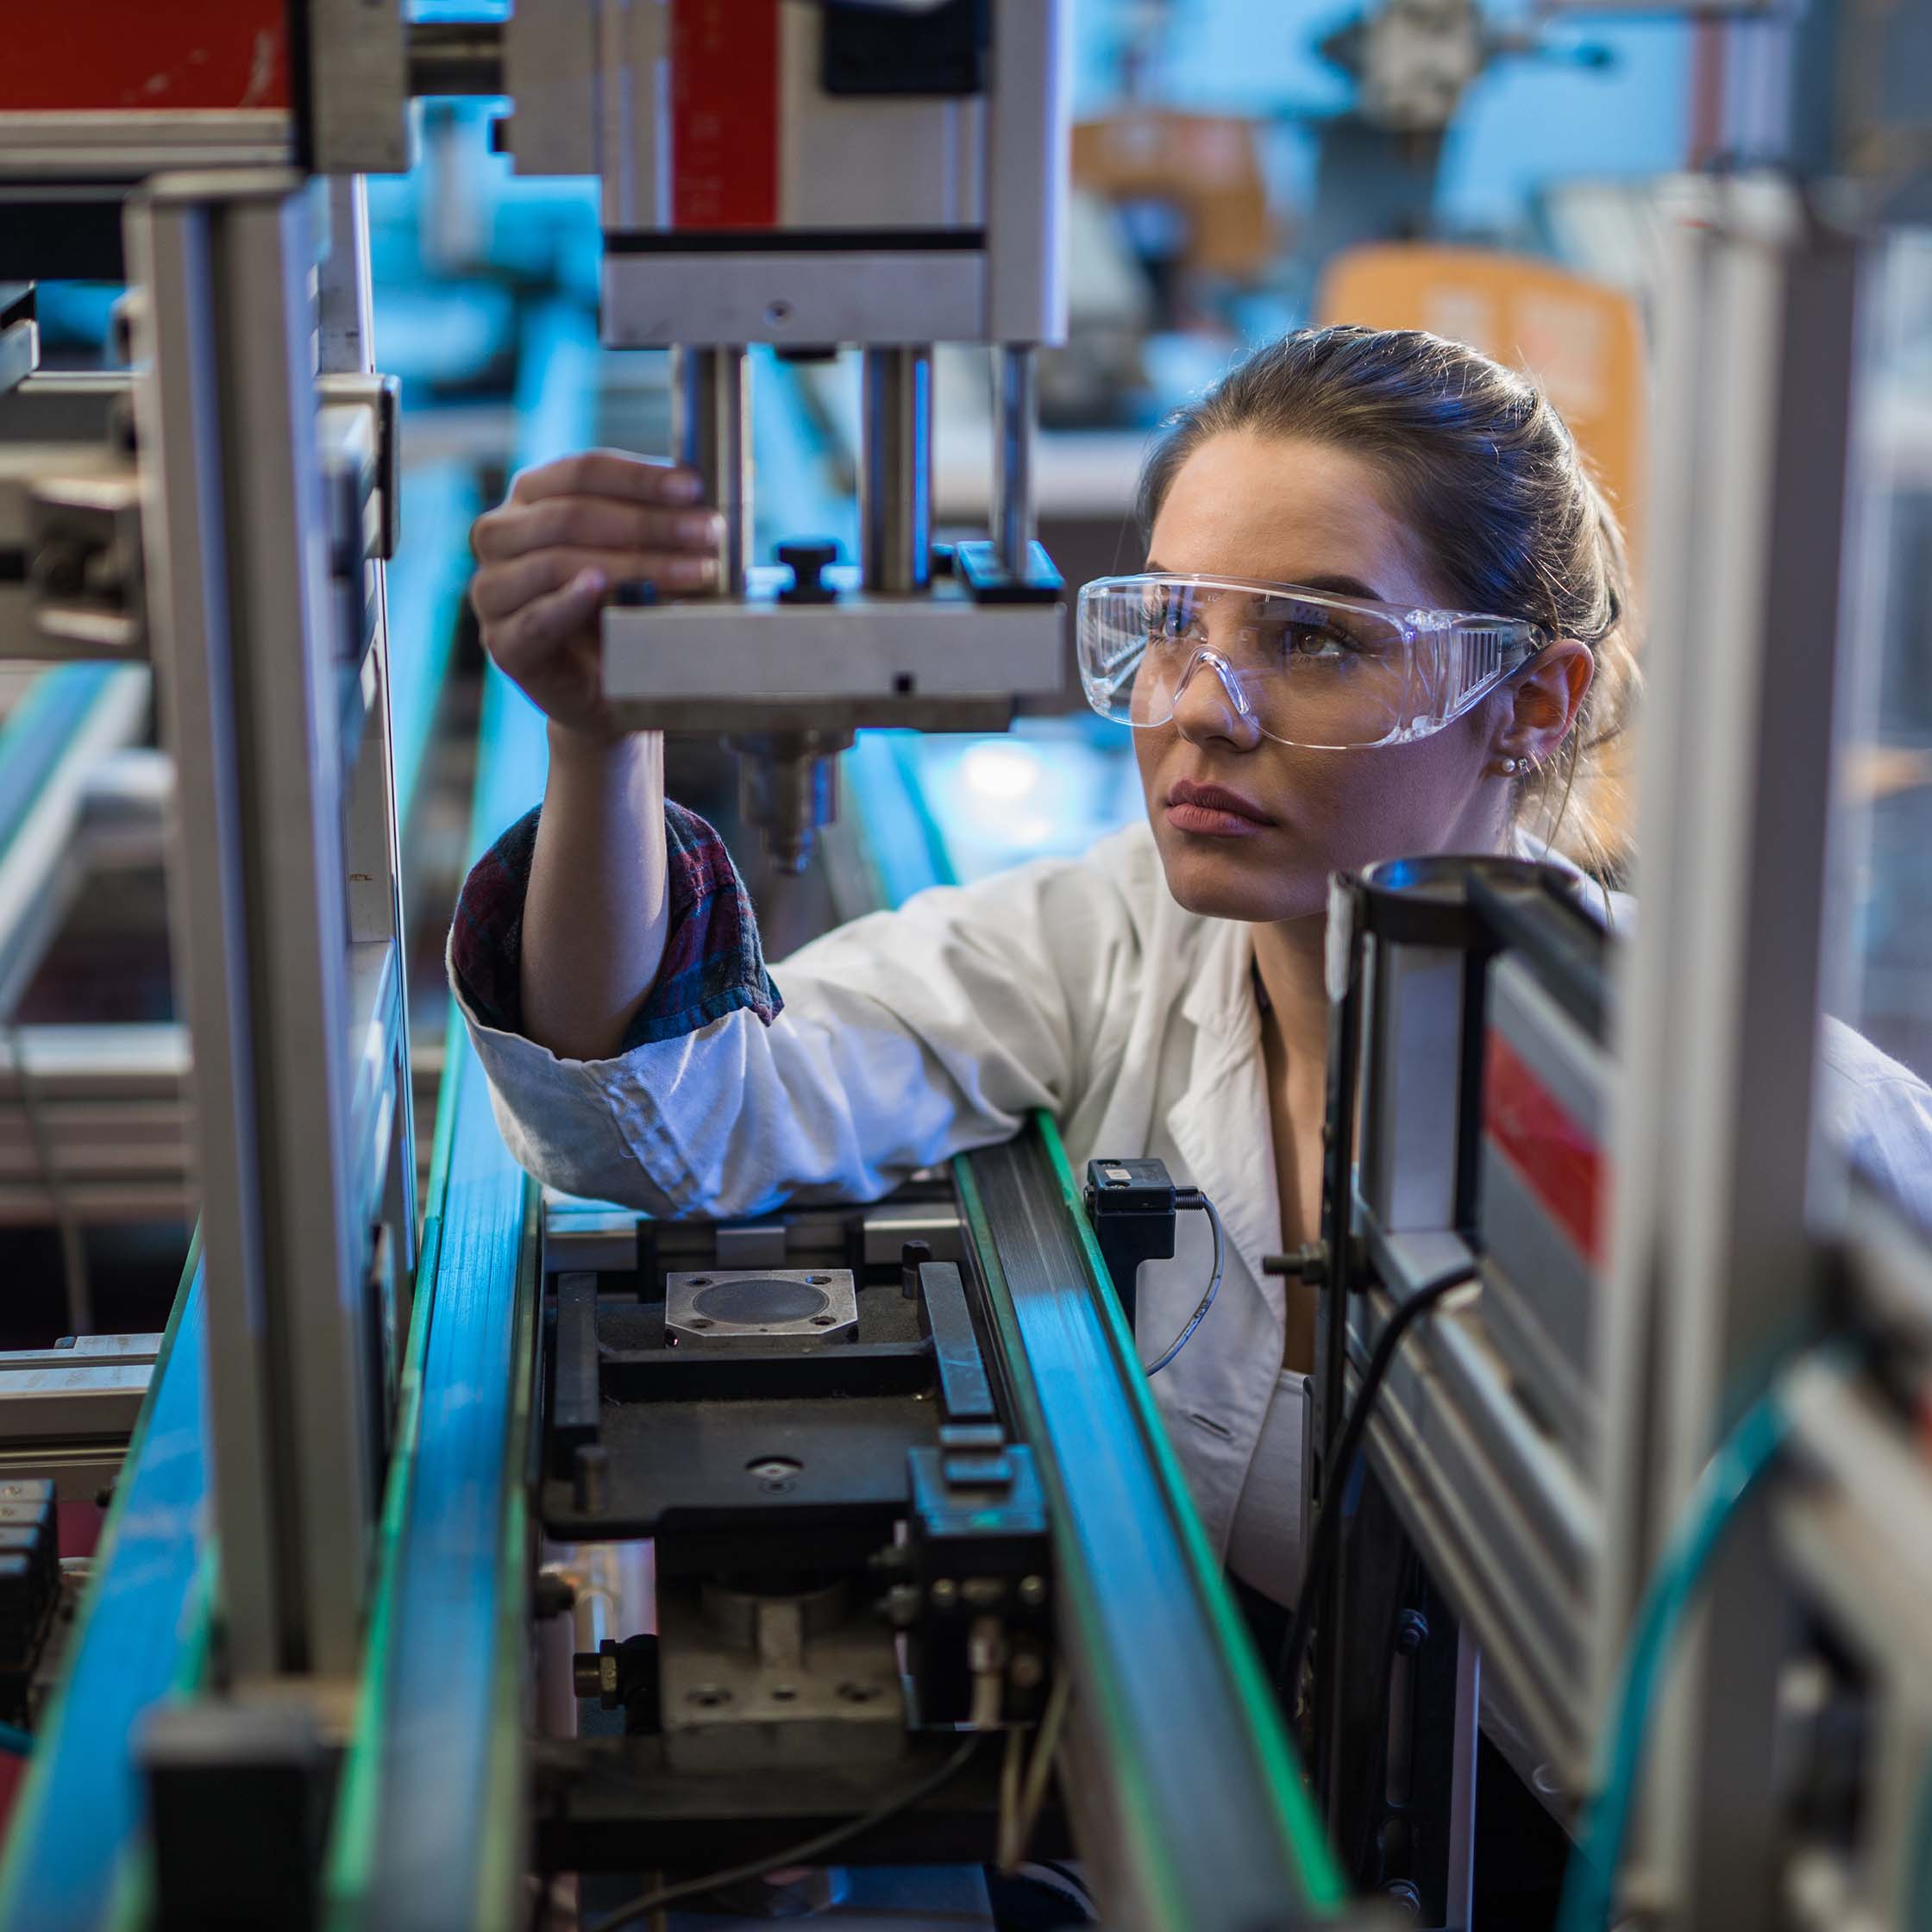 Female Worker wearing safety glasses inspecting a assembly line robot arm